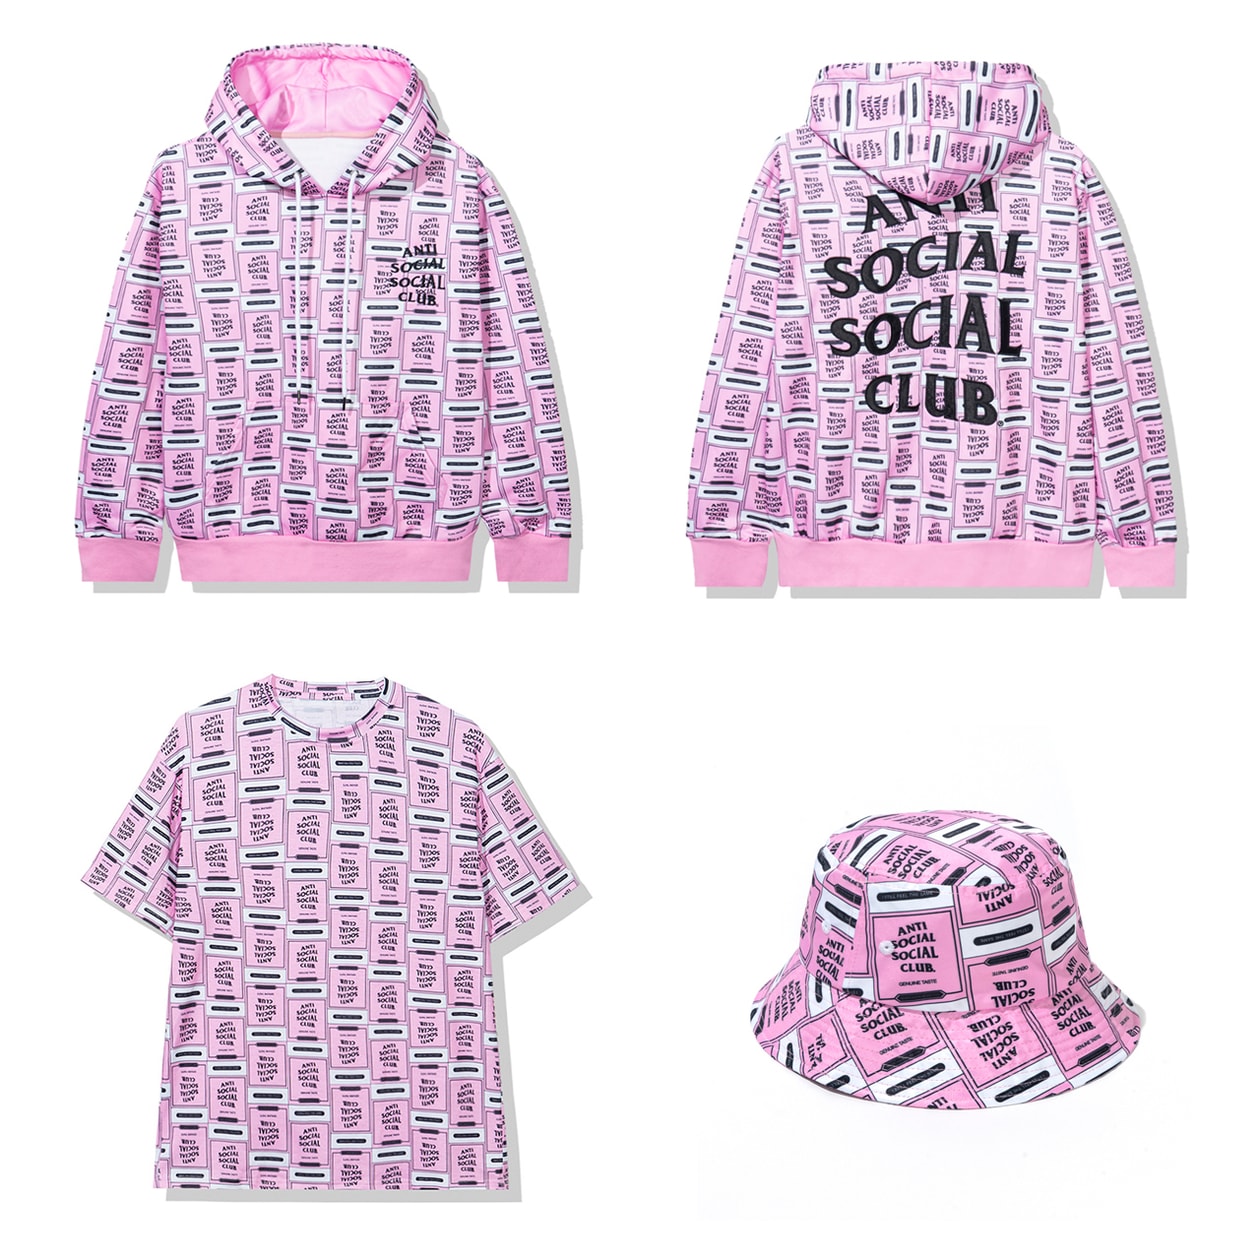 Cactus Plant Flea Market, UNDEFEATED x Anti Social Social Club collaboration collections fall winter 2020 release date info buy august 1